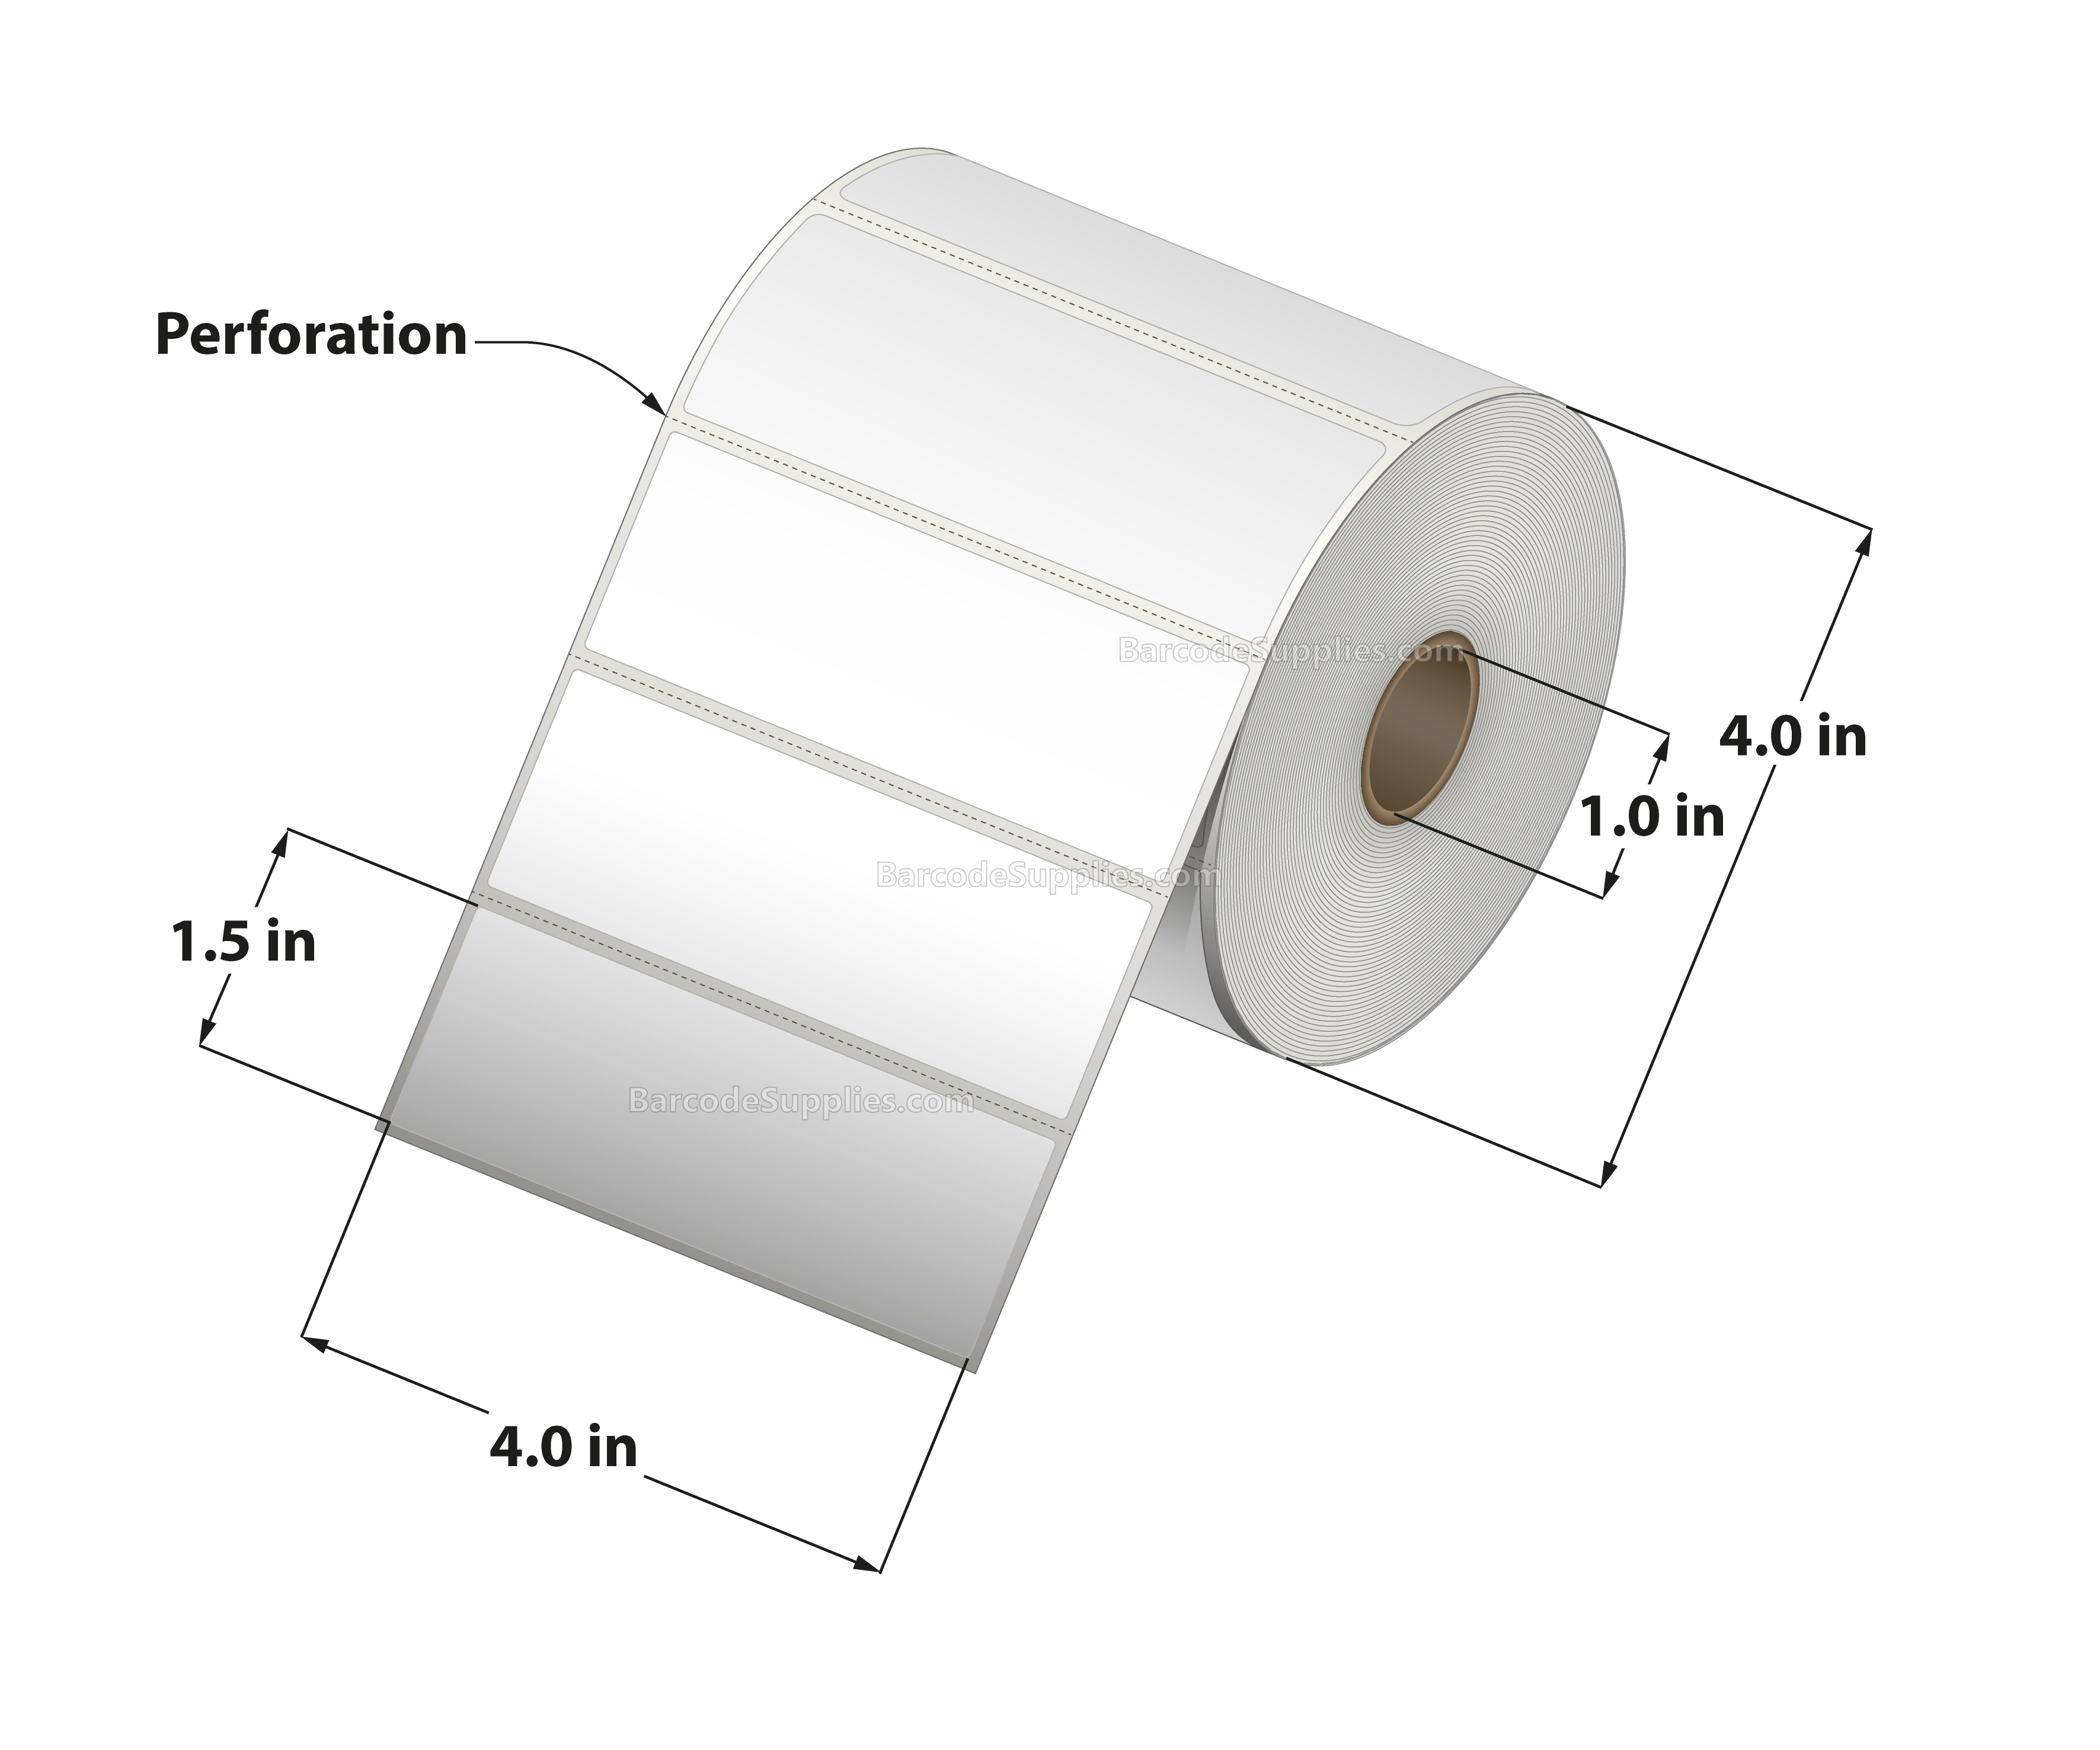 4 x 1.5 Direct Thermal White Labels With Acrylic Adhesive - Perforated - 960 Labels Per Roll - Carton Of 12 Rolls - 11520 Labels Total - MPN: RD-4-15-960-1 - BarcodeSource, Inc.